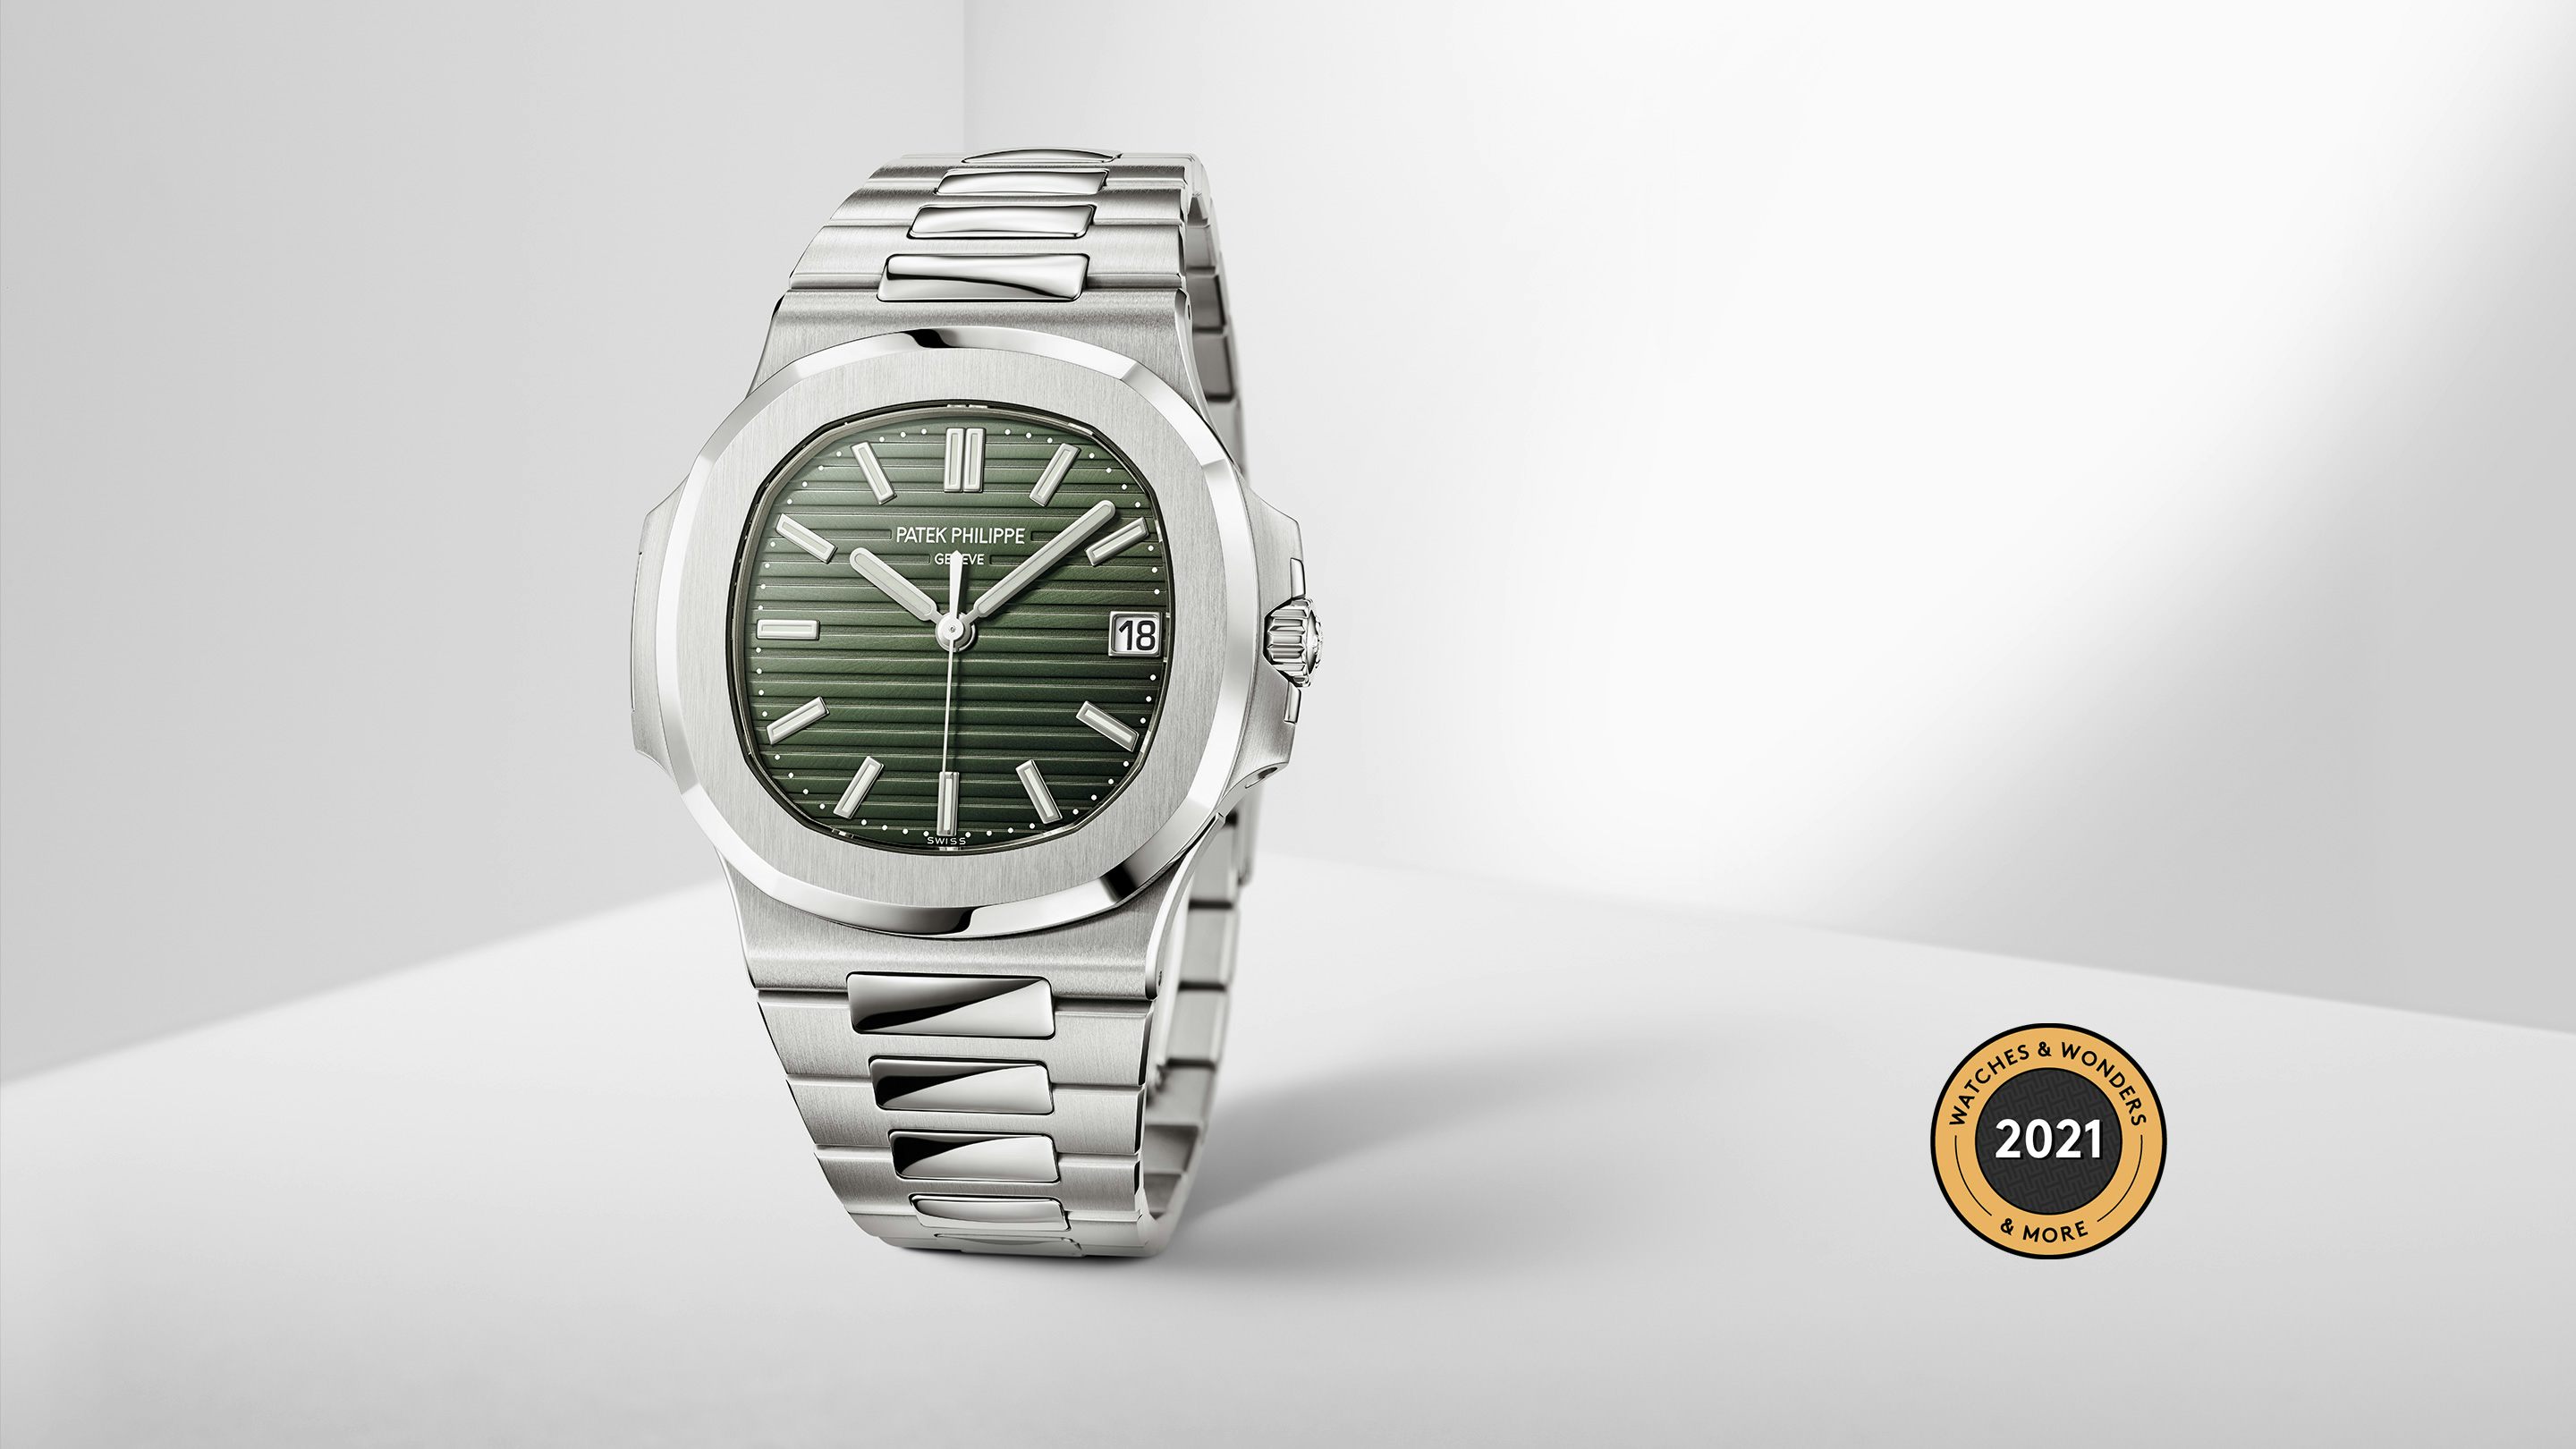 Introducing The New Patek Philippe Nautilus Ref 5711 1a 014 Now With An Olive Green Dial Hodinkee